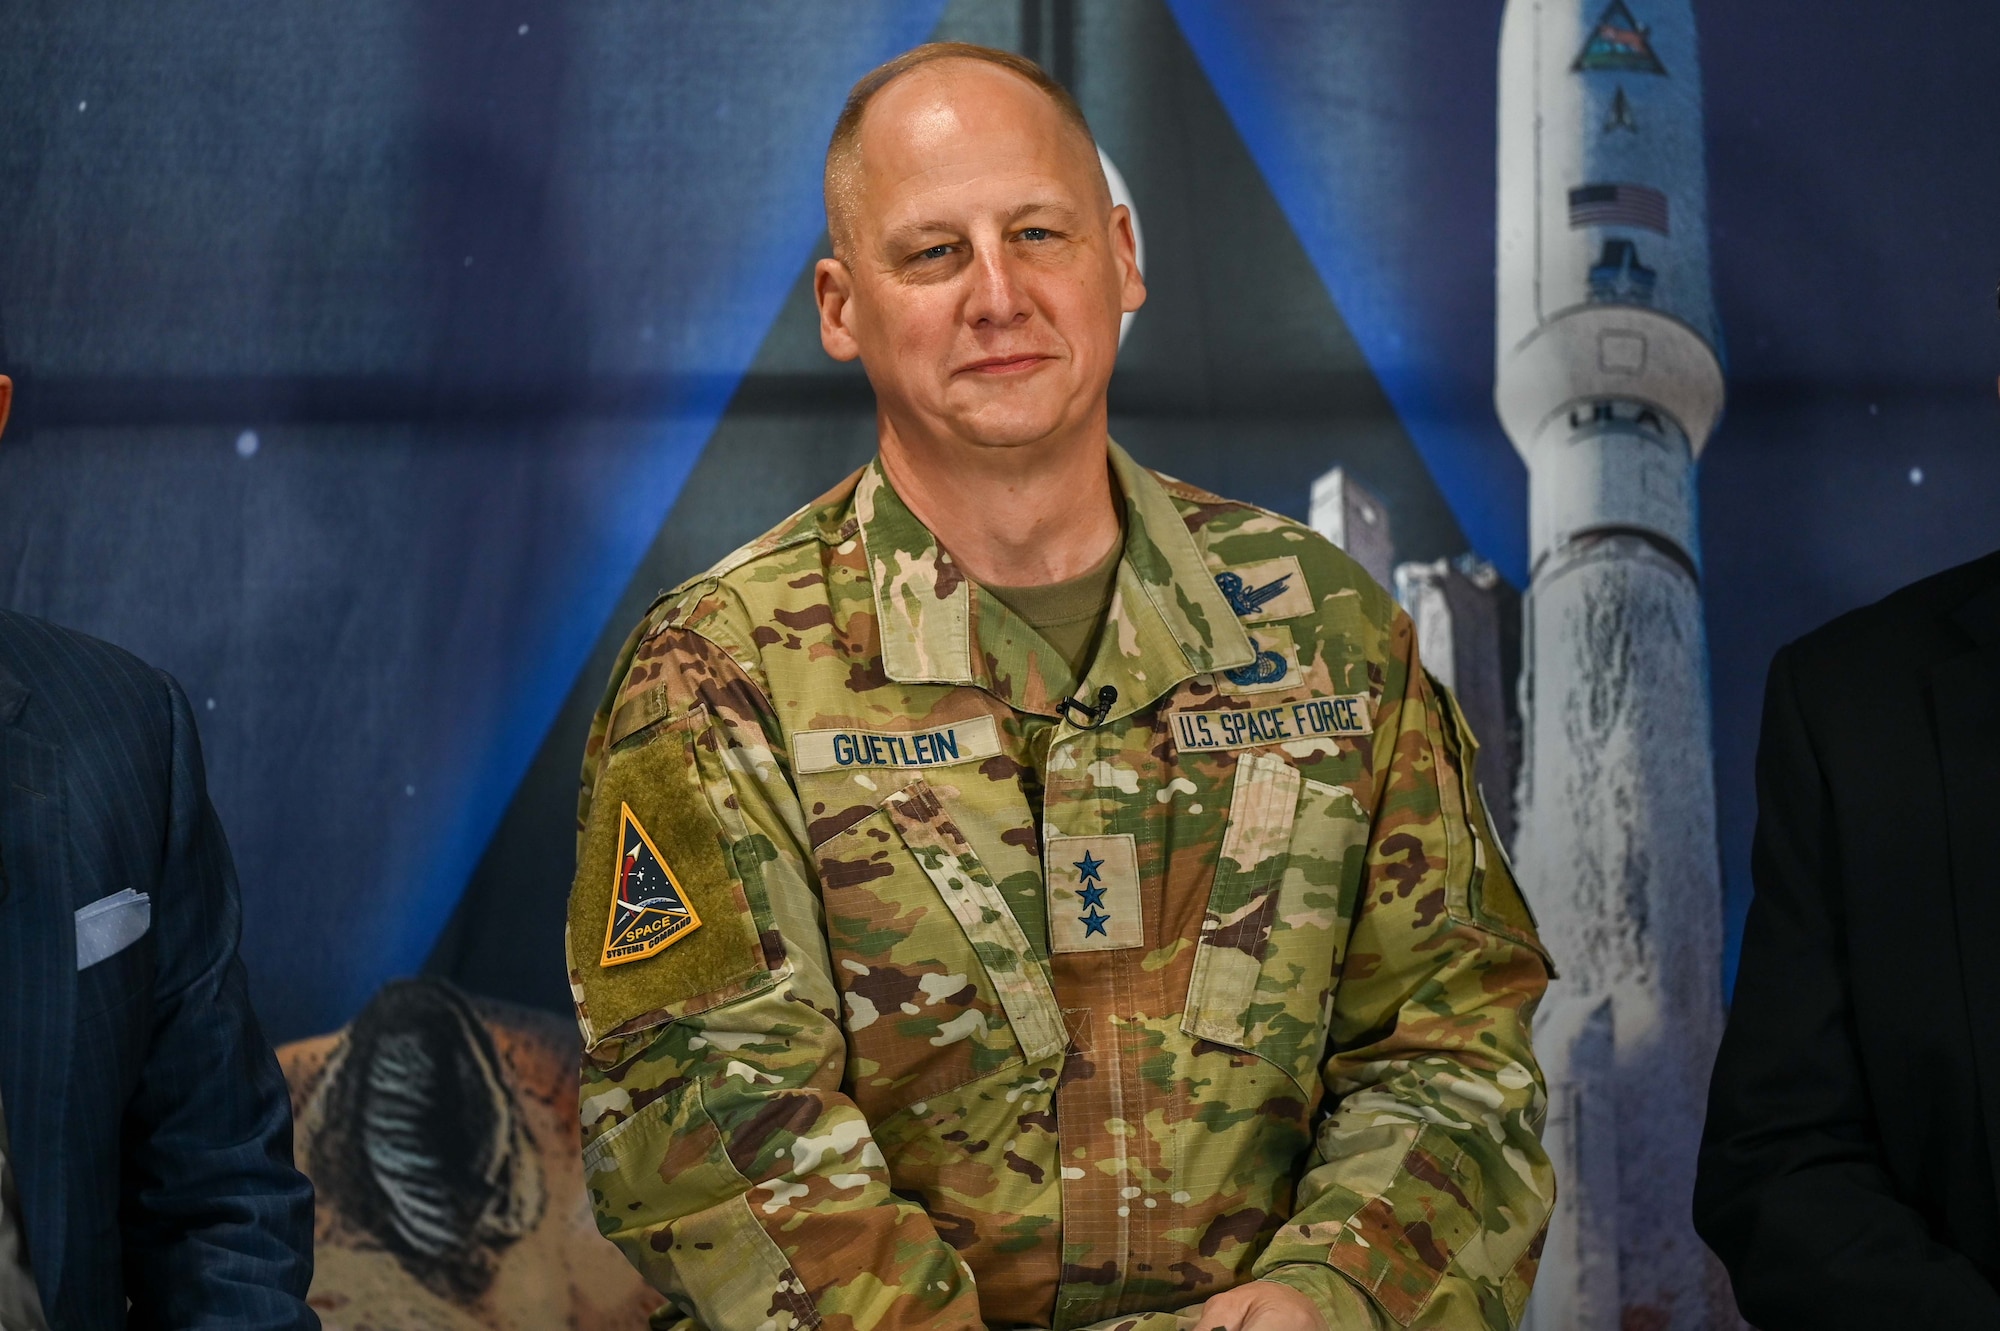 U.S. Space Force Lt. Gen. Michael Guetlein, Space Systems Command commander, answers questions from news agencies during the SILENTBARKER/NROL-107 media round table at Cape Canaveral Space Force Station, Florida, Aug. 28, 2023. SILENTBARKER/NROL-107 is a joint National Reconnaissance Office and USSF Space Domain Awareness mission to meet the Department of Defense and Intelligence Community space protection needs and is designed to detect and maintain custody of space objects. (U.S. Space Force photo by Senior Airman Samuel Becker)